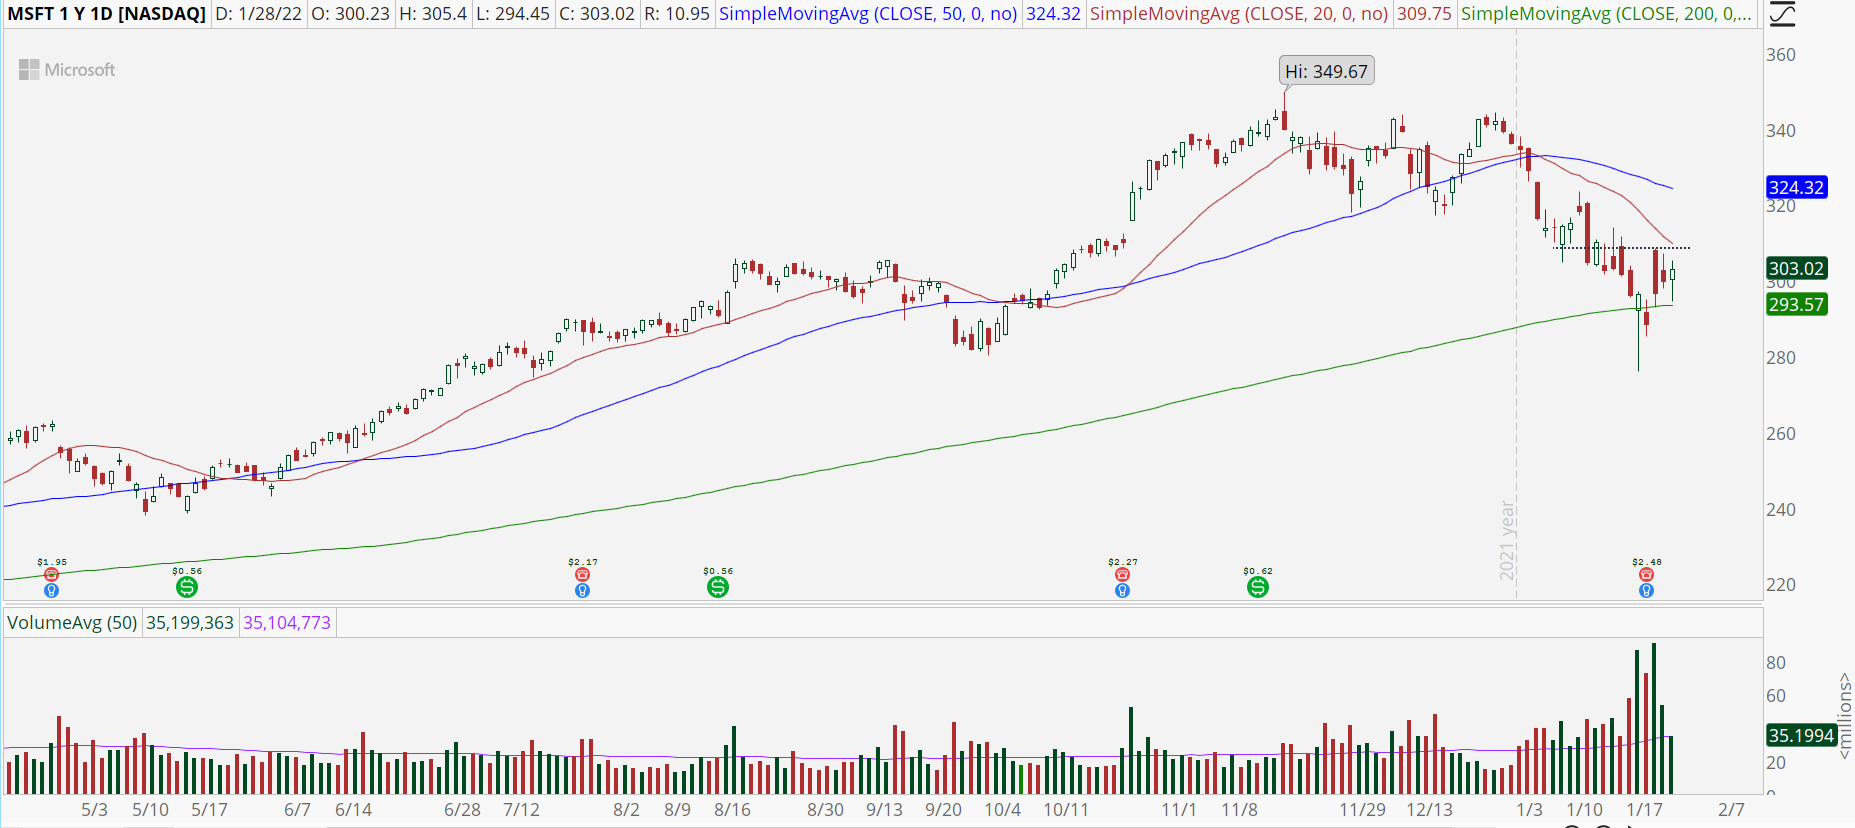 Microsoft (MSFT) stock chart with positive earnings response.